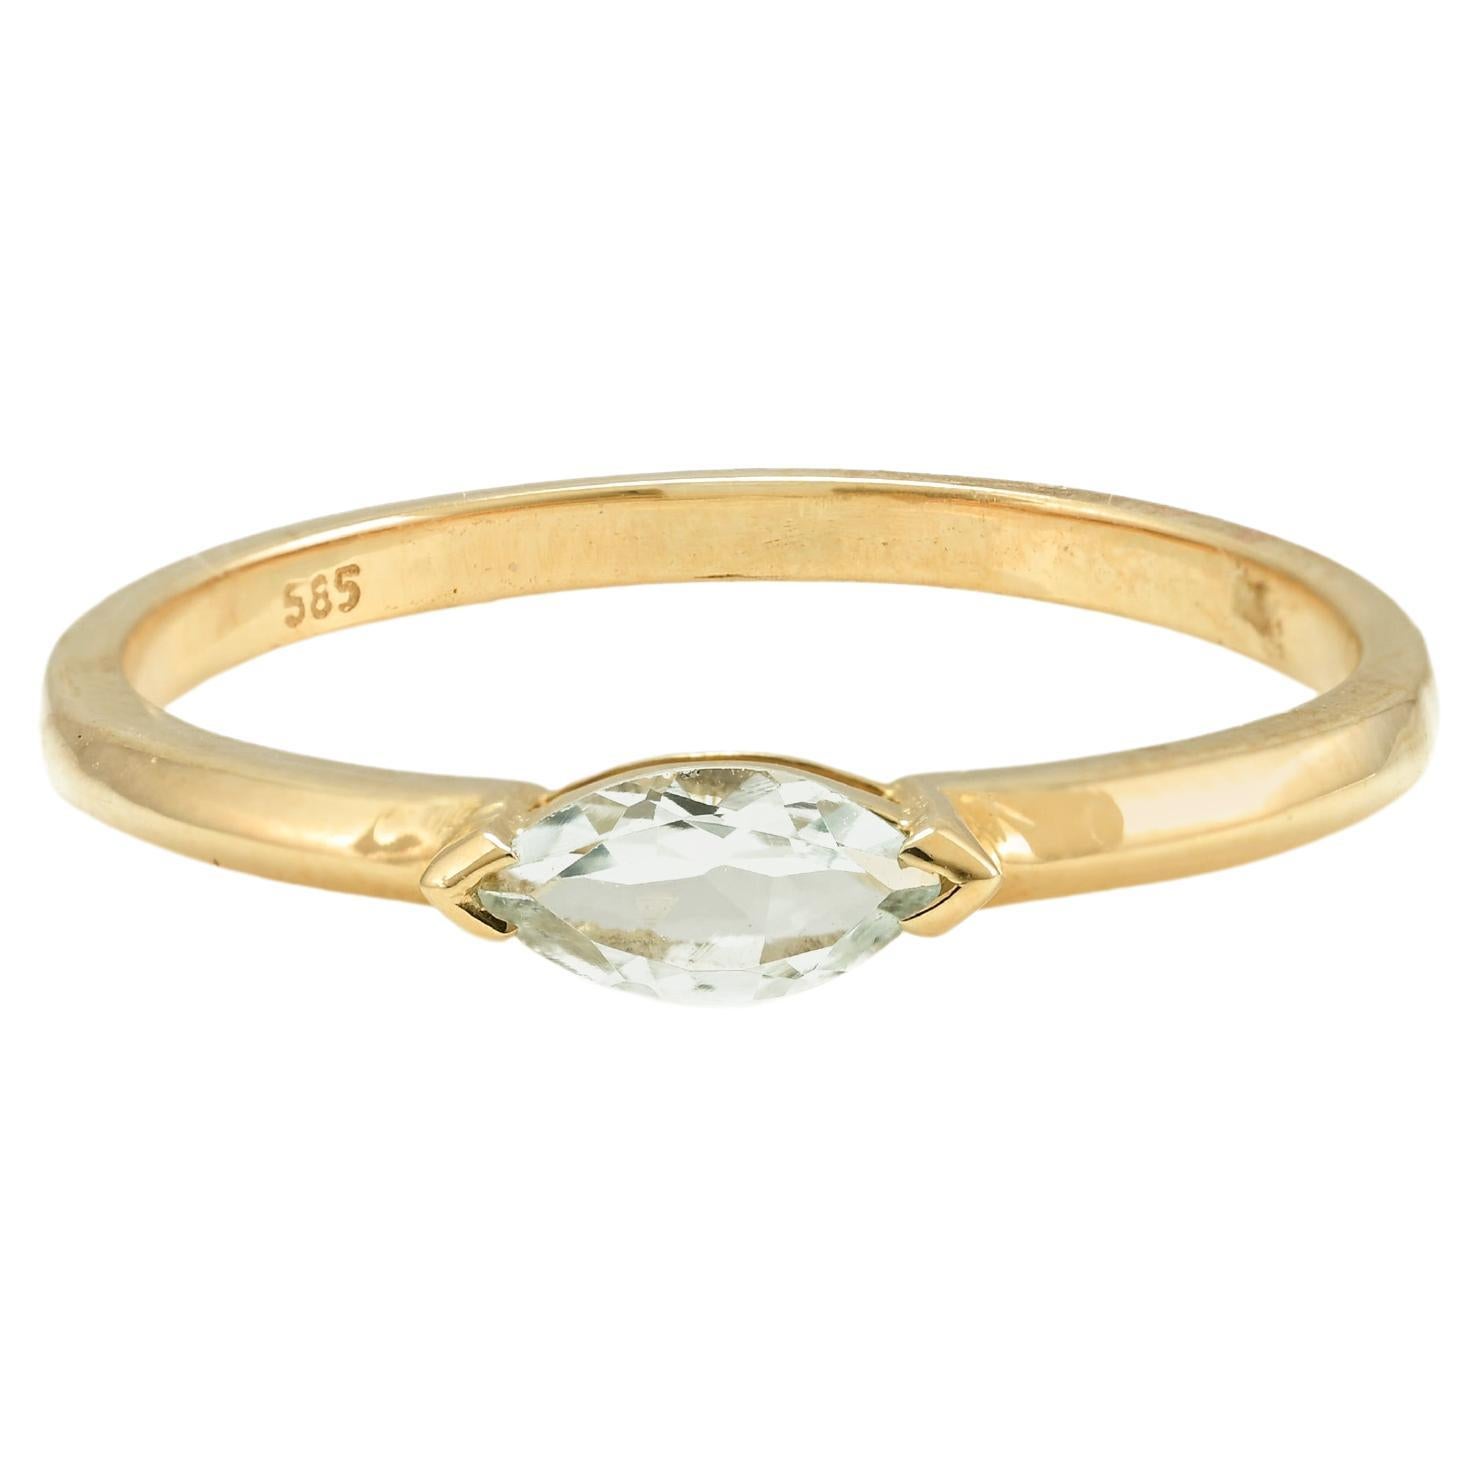 Bague empilable aigue-marine taille marquise en or jaune massif 14 carats